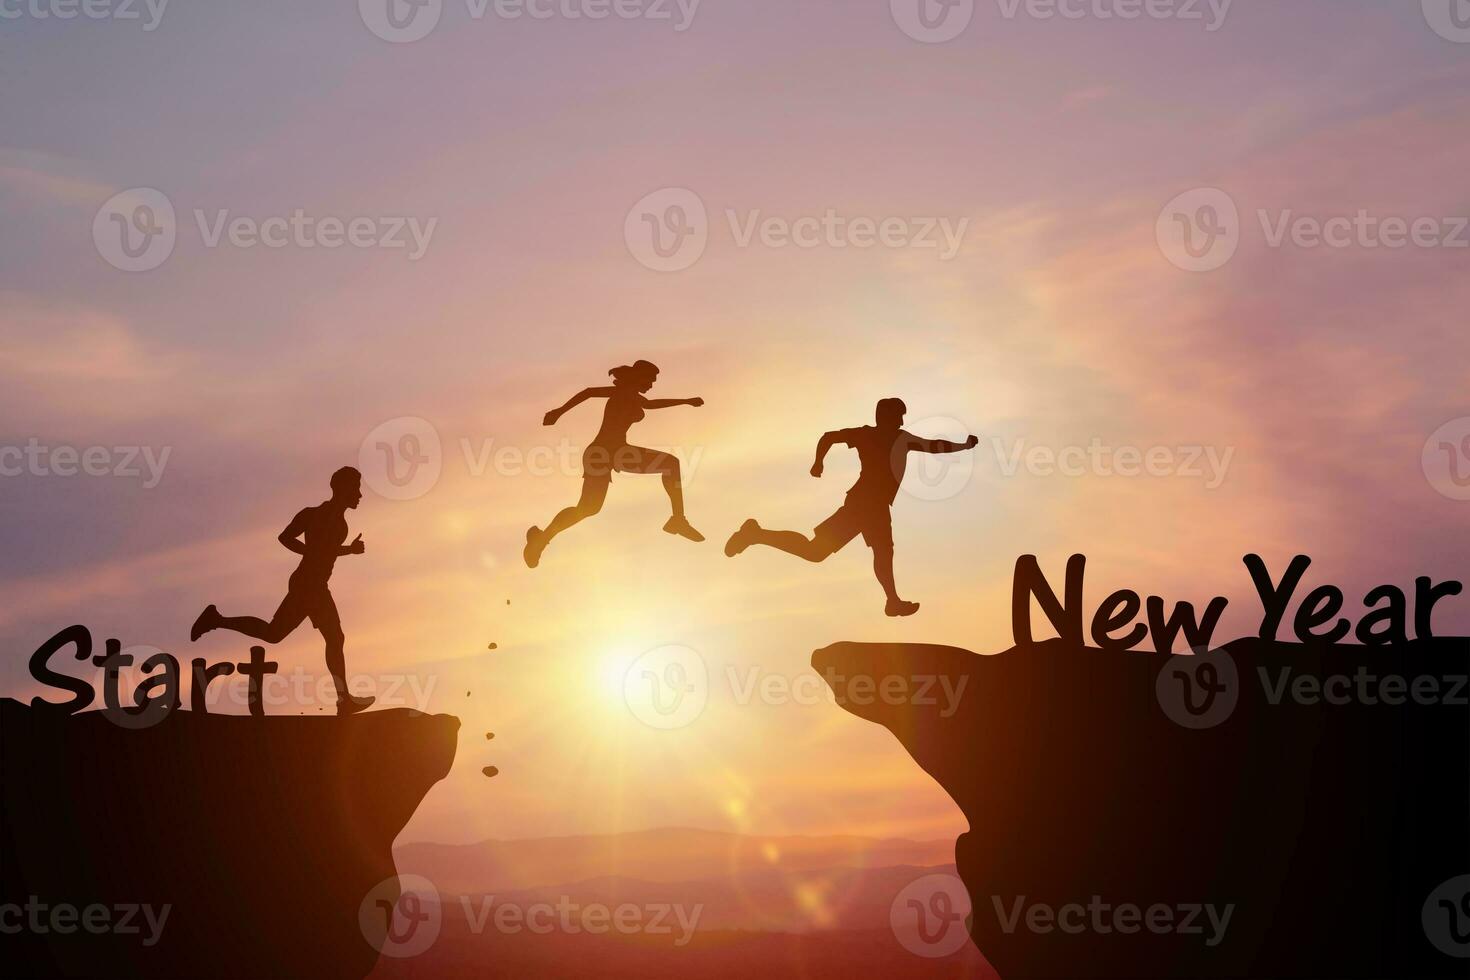 Ideas for starting a business and competing with challenges or a new career. Silhouettes of people jumping over cliffs in evening sunlight. It represents the beginning of opportunity and change photo